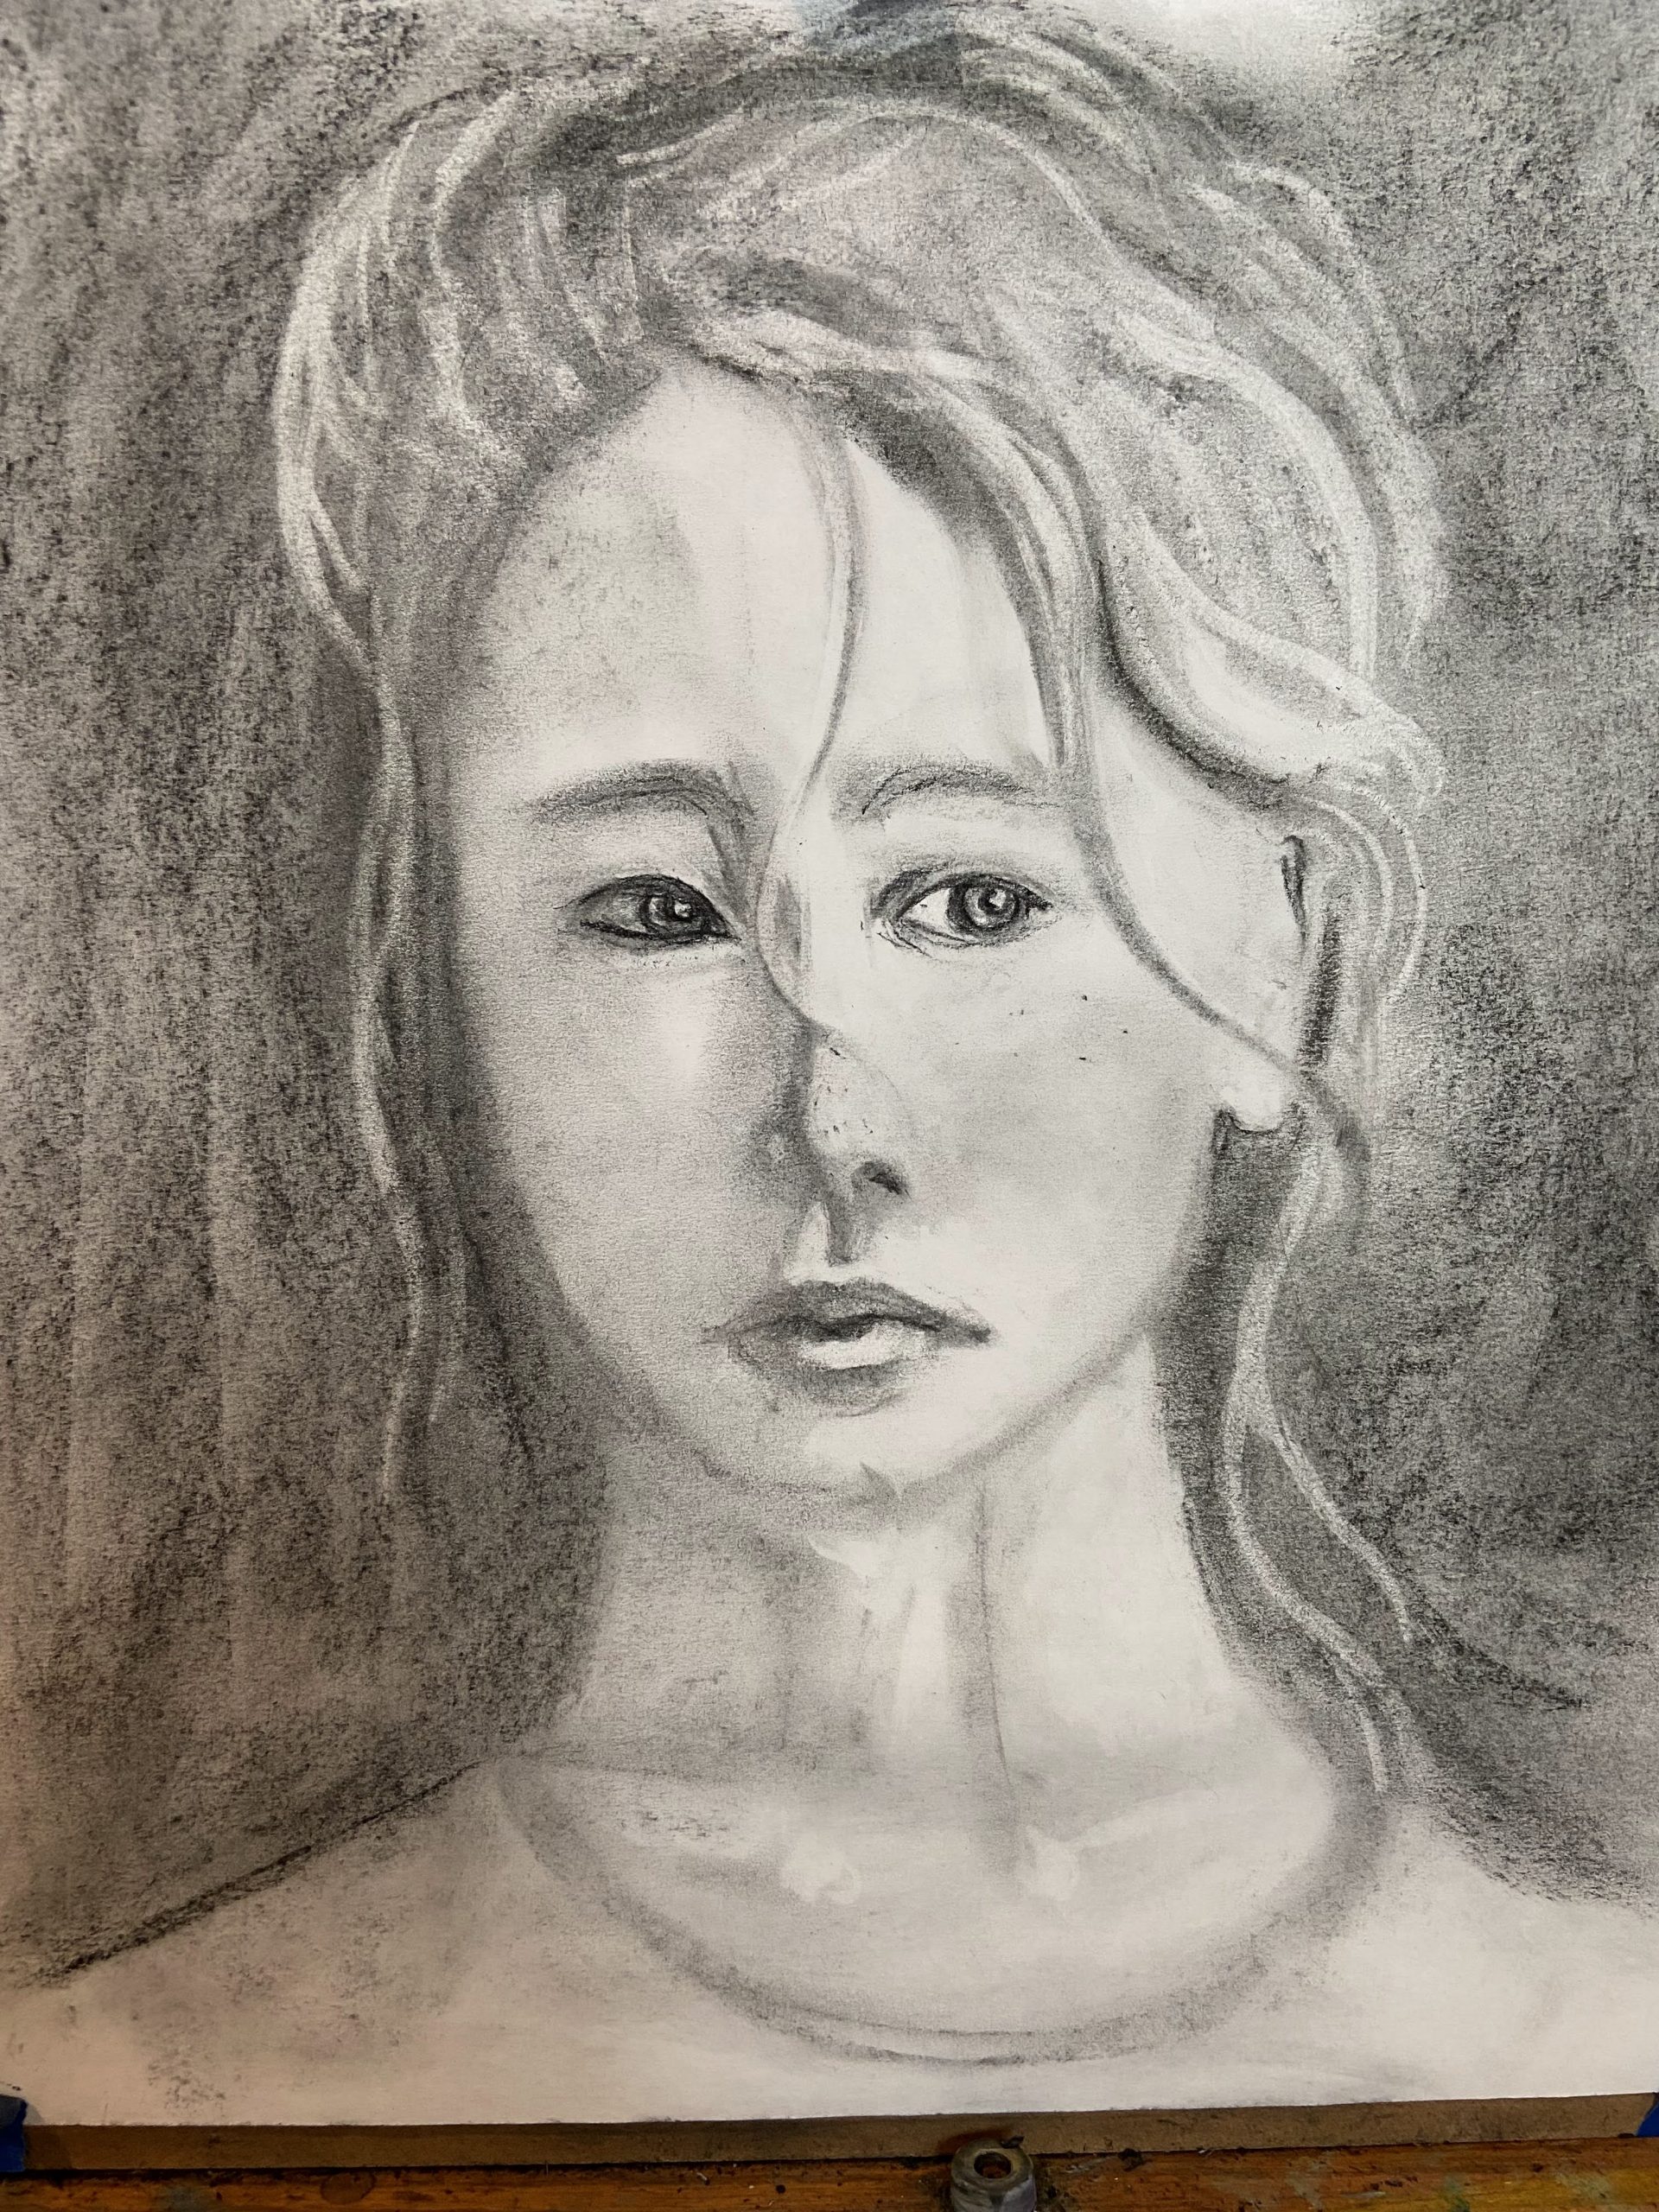 Charcoal portrait of a young woman